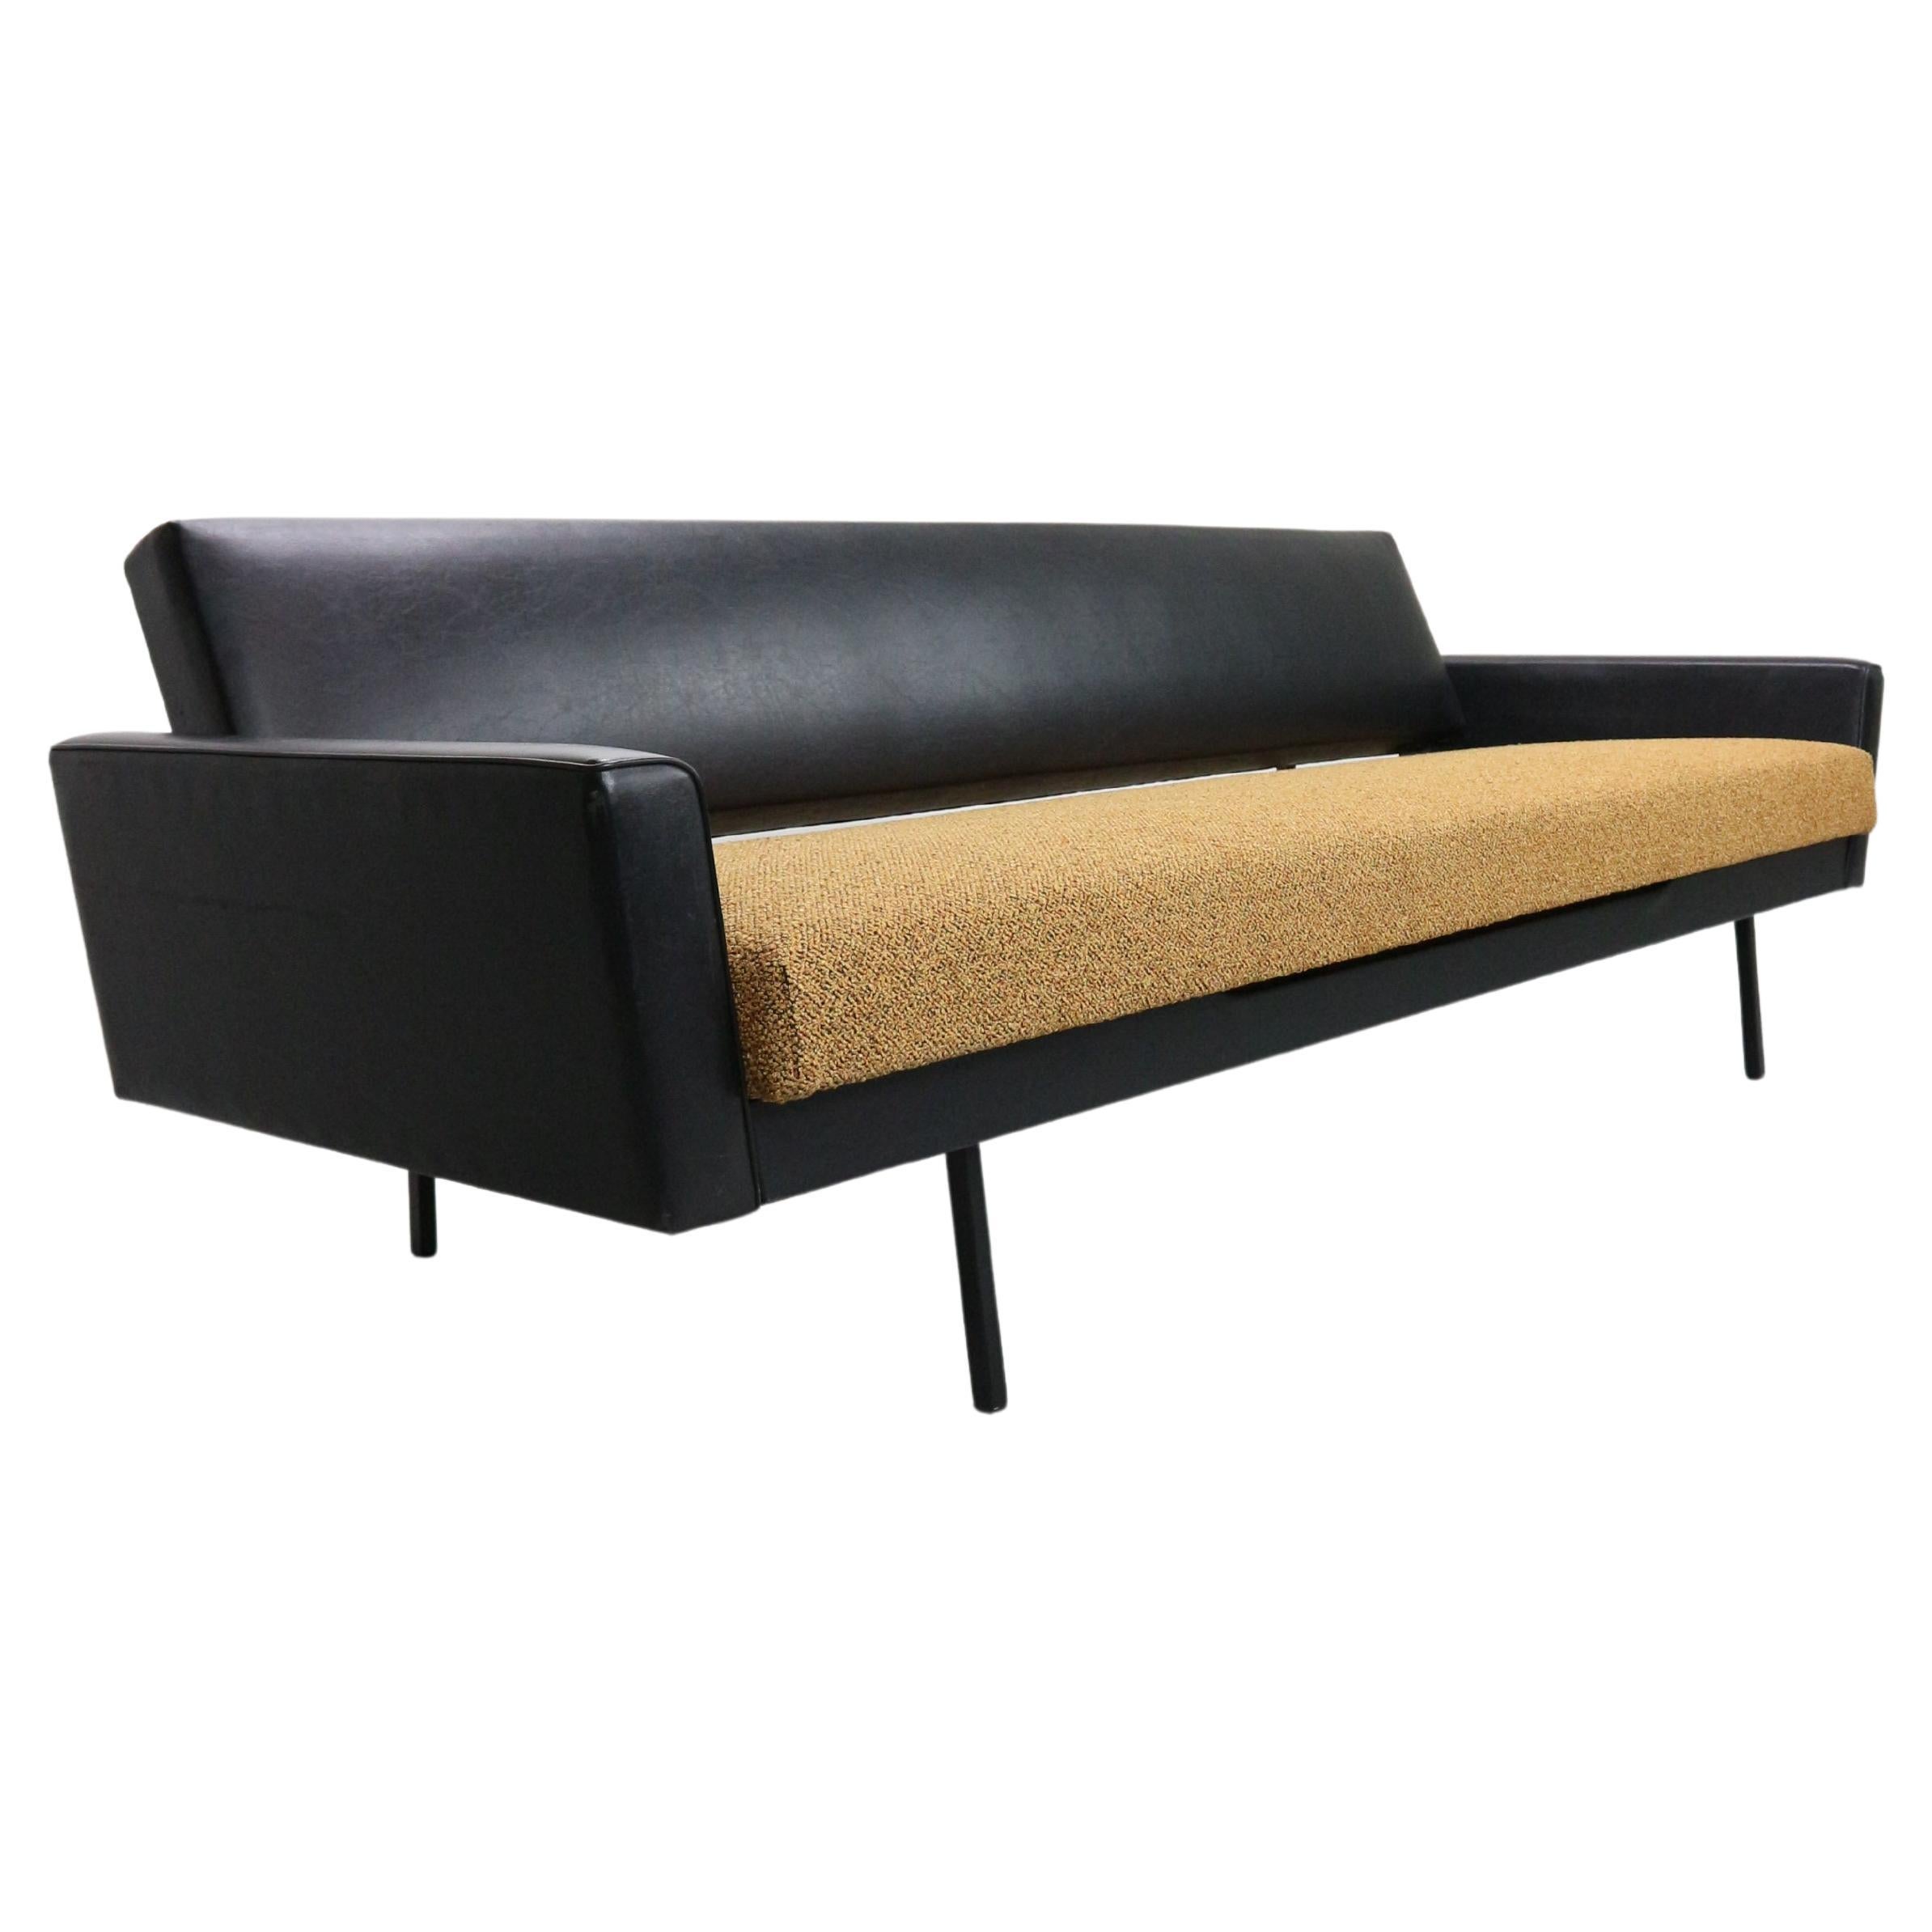 Vintage Gelderland daybed sofa by Rob Parry, 1970s . New upholstery